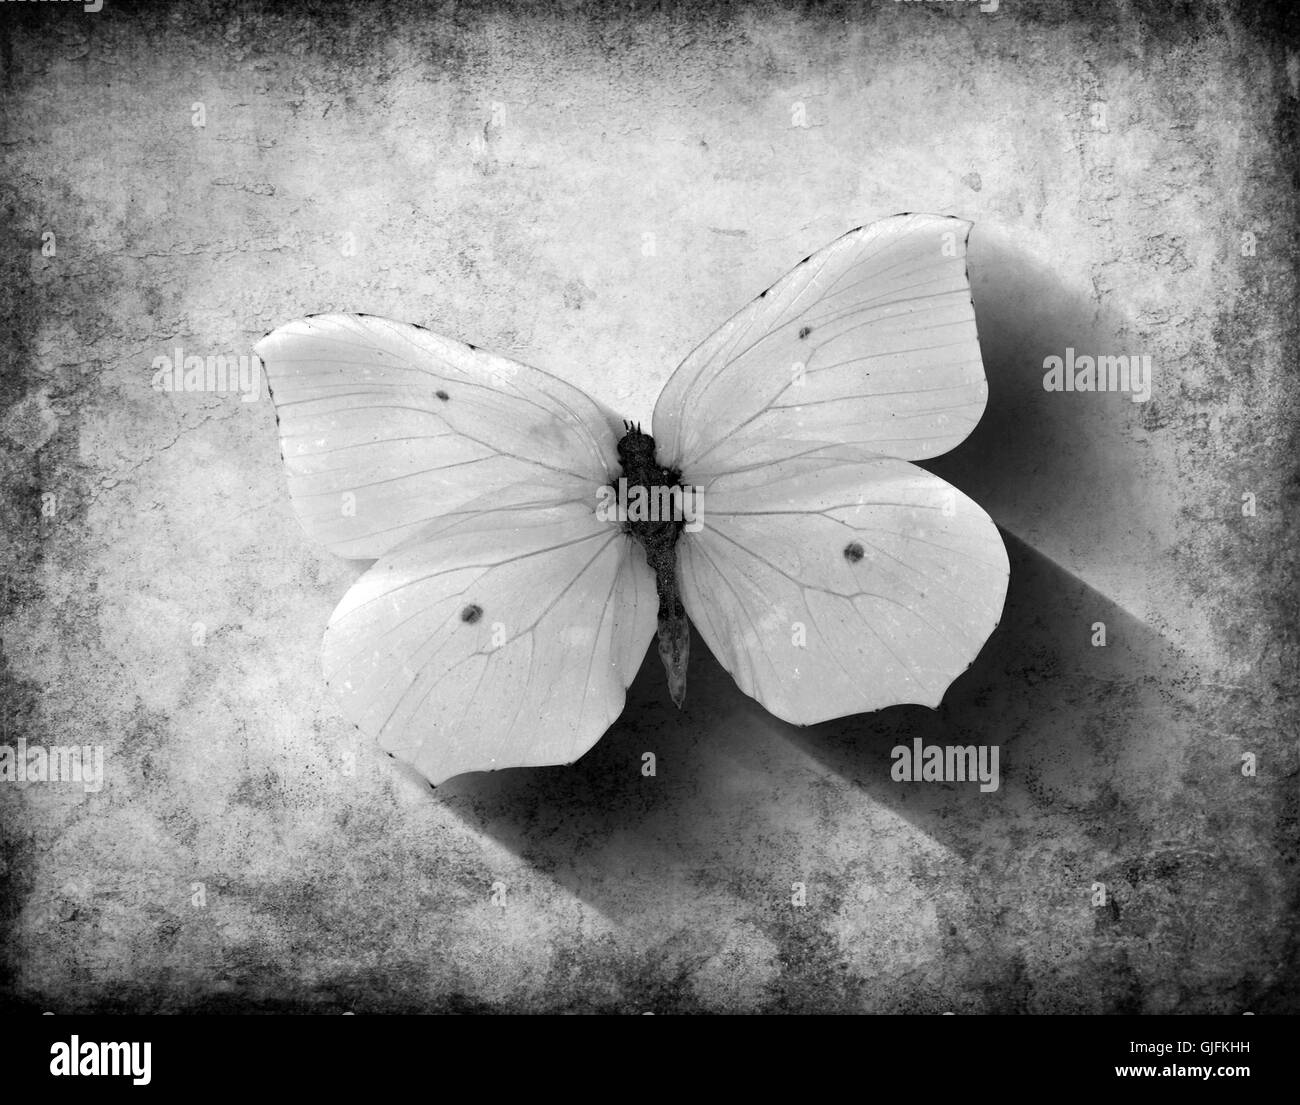 Vintage black and white butterfly with shadow on a grunge background Stock Photo